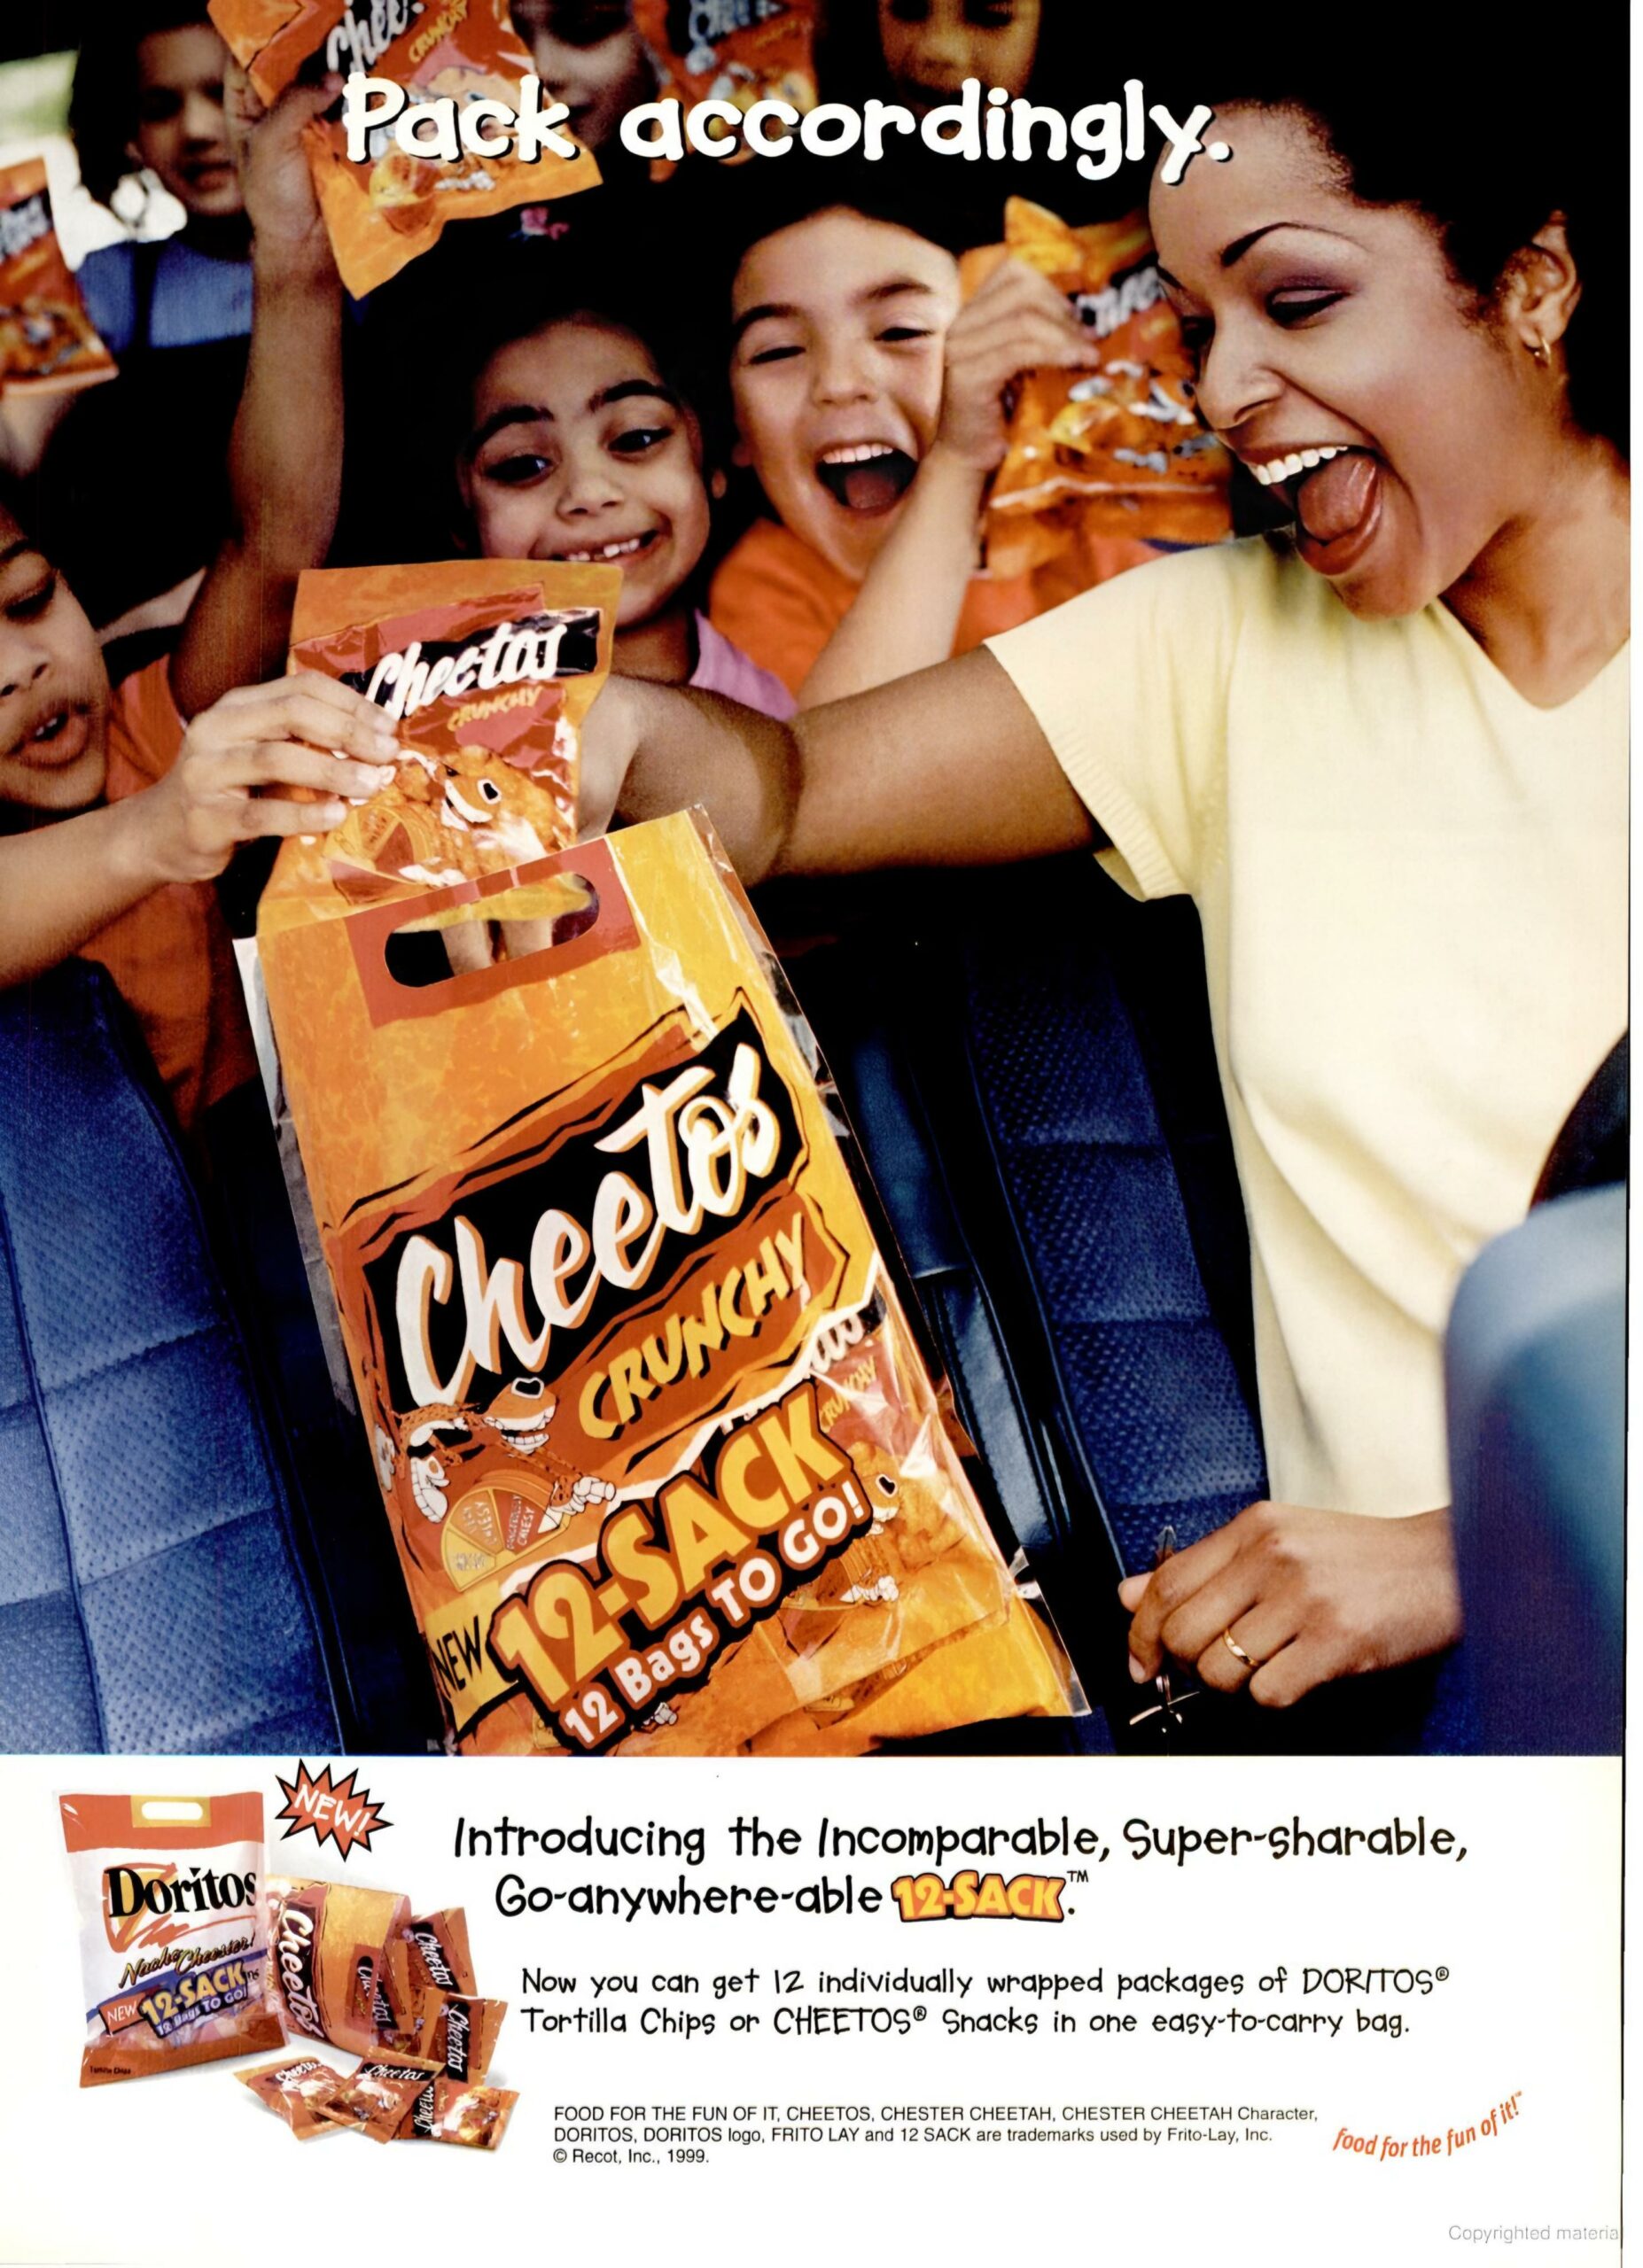 Children reaching for a Cheetos bag and the title "Pack accordingly."